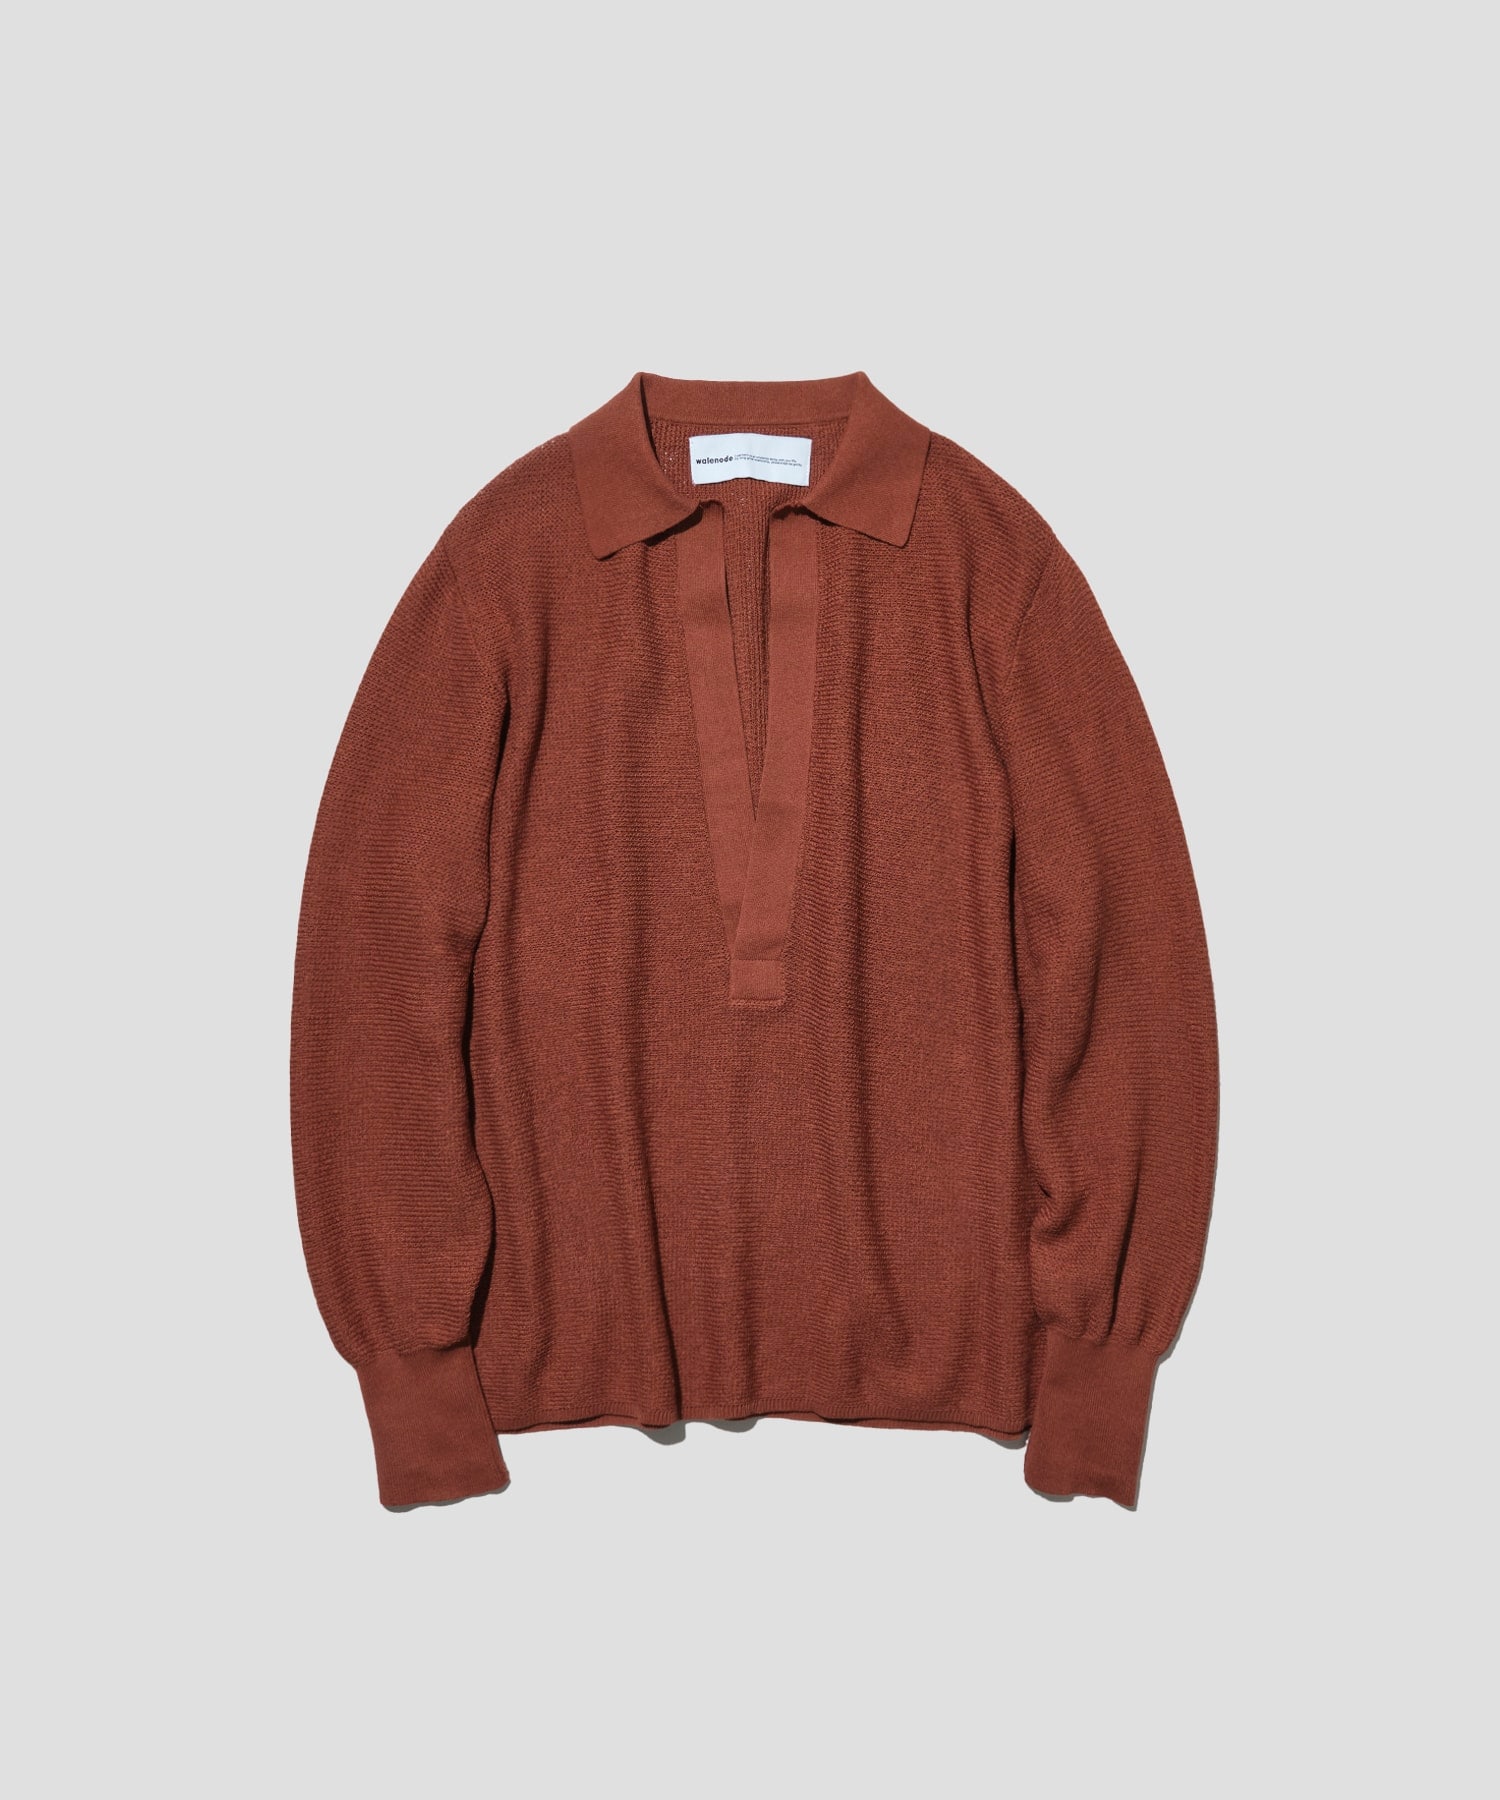 Paper & Recycled polyester Skipper knit wear | walenode